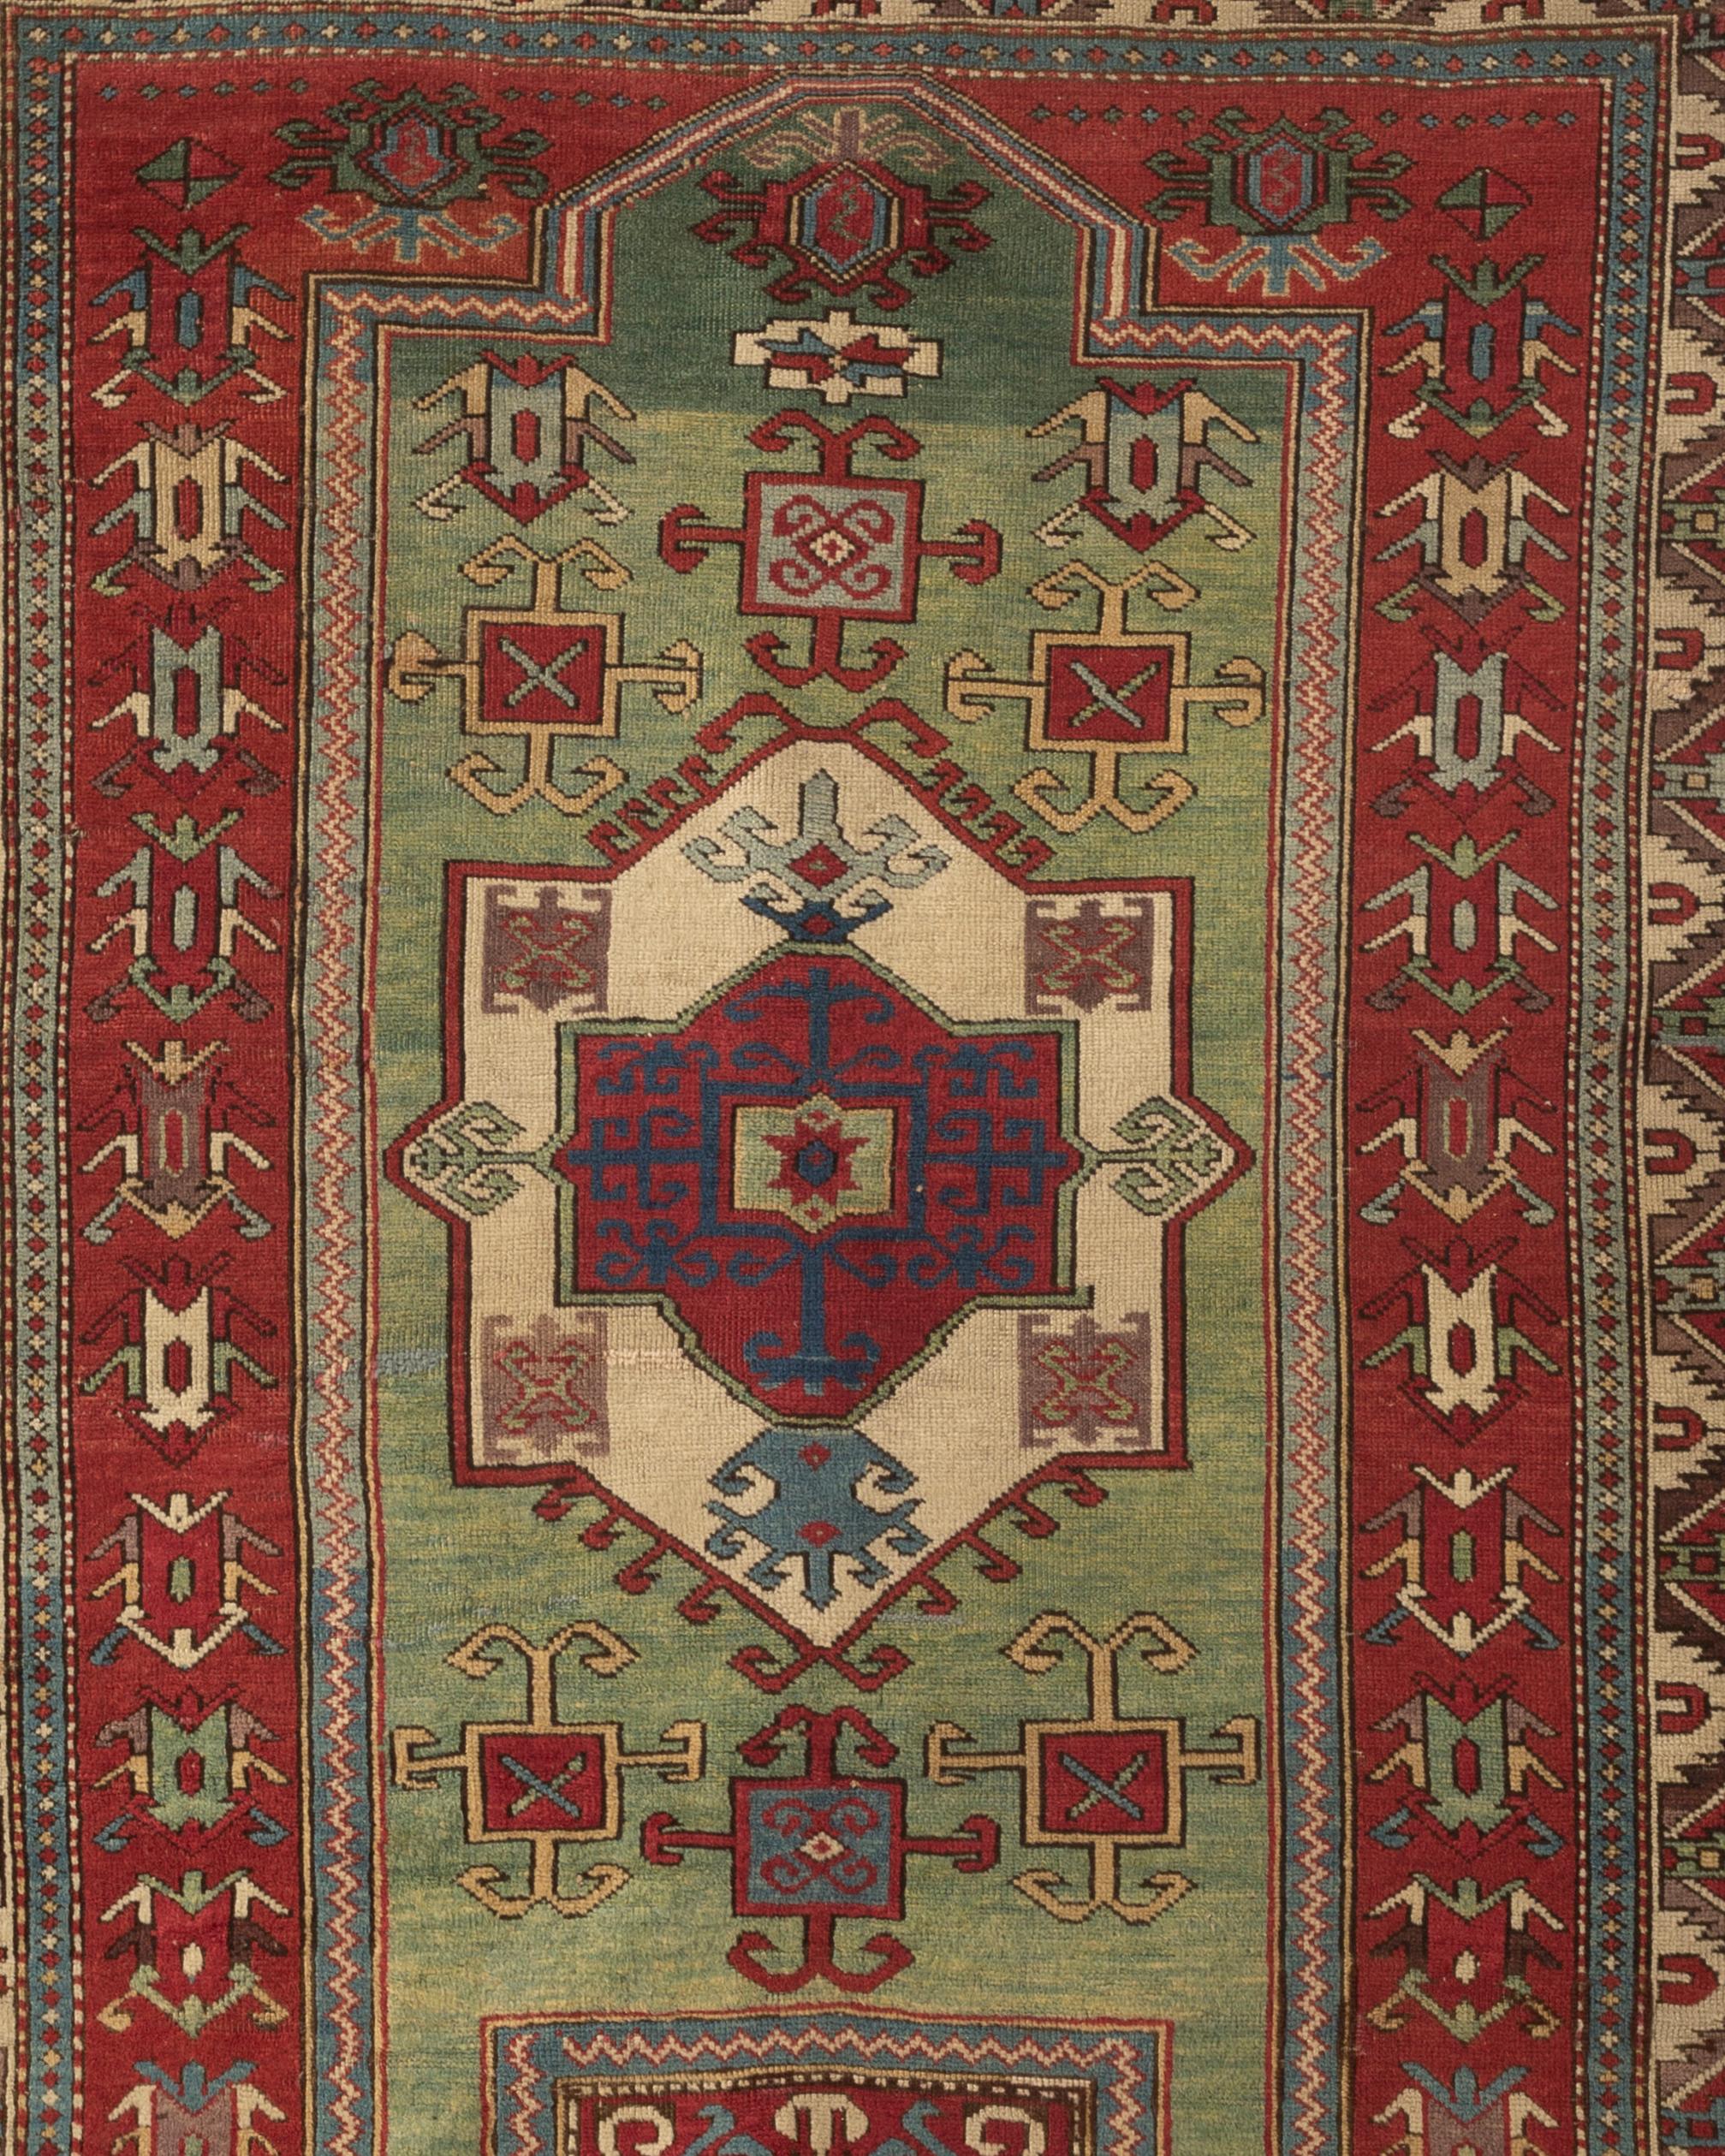 Antique Fachralo Kazak rug, circa 1880, From south west Caucasia, Fachralo is due west of Kazak just over the Armenian border and they are difficult to find. This fine example displays all the characteristics associated with this area with wonderful